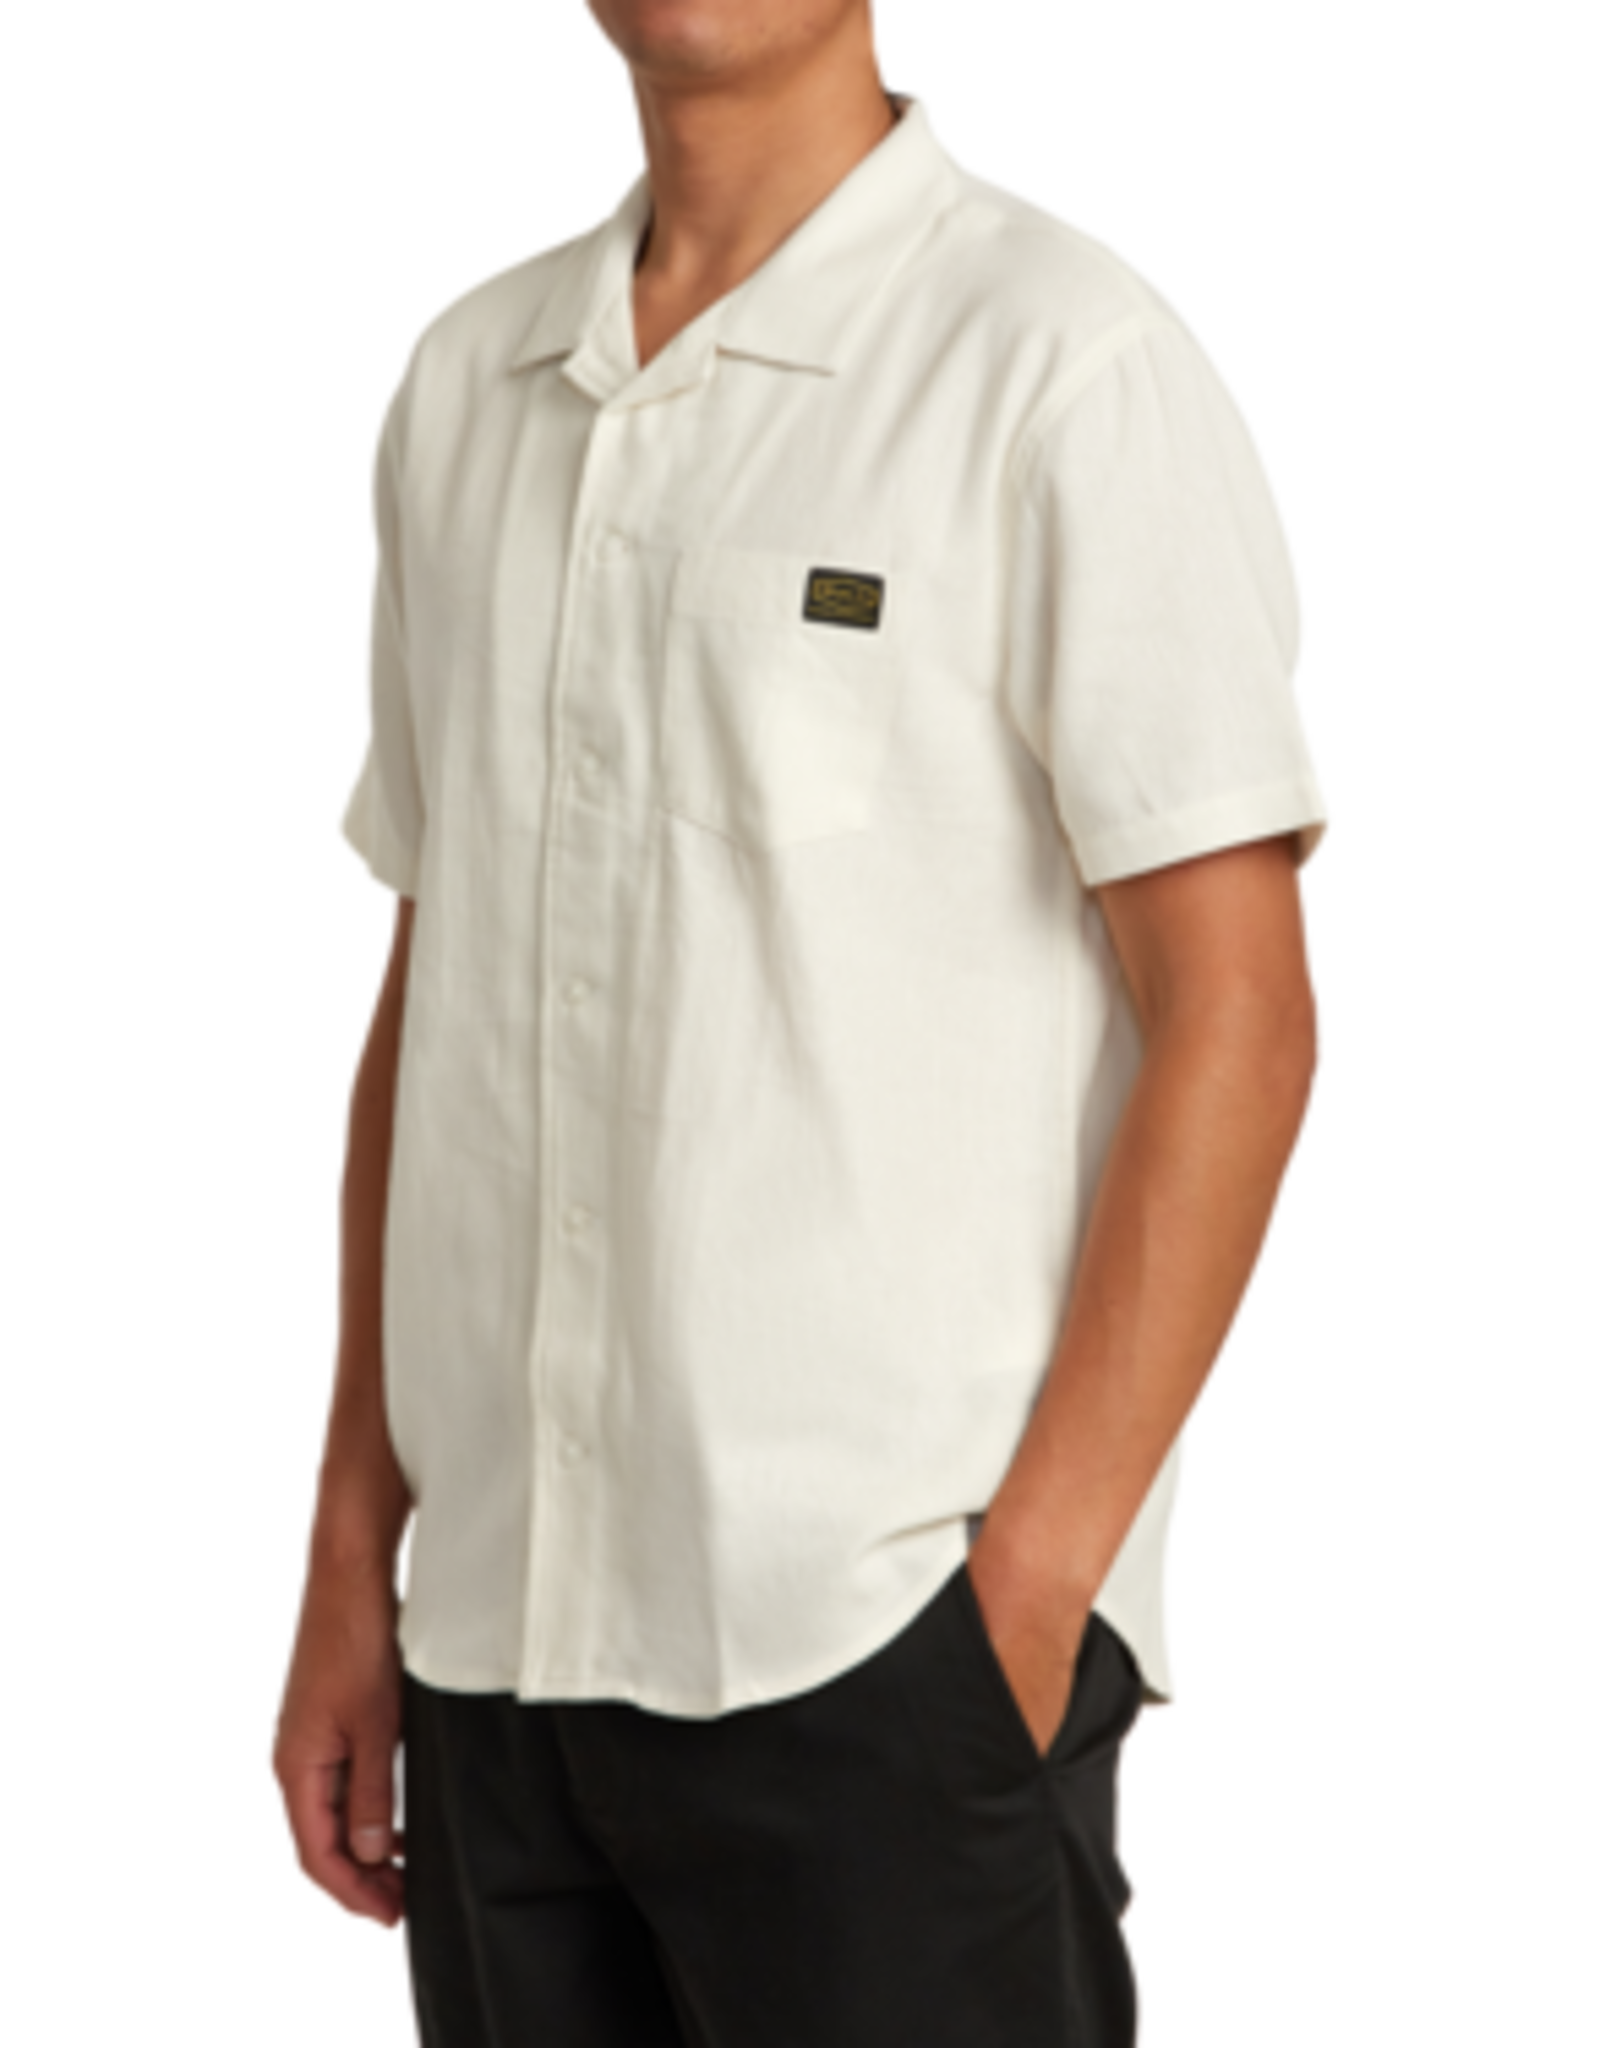 RVCA DAY SHIFT SOLID SS